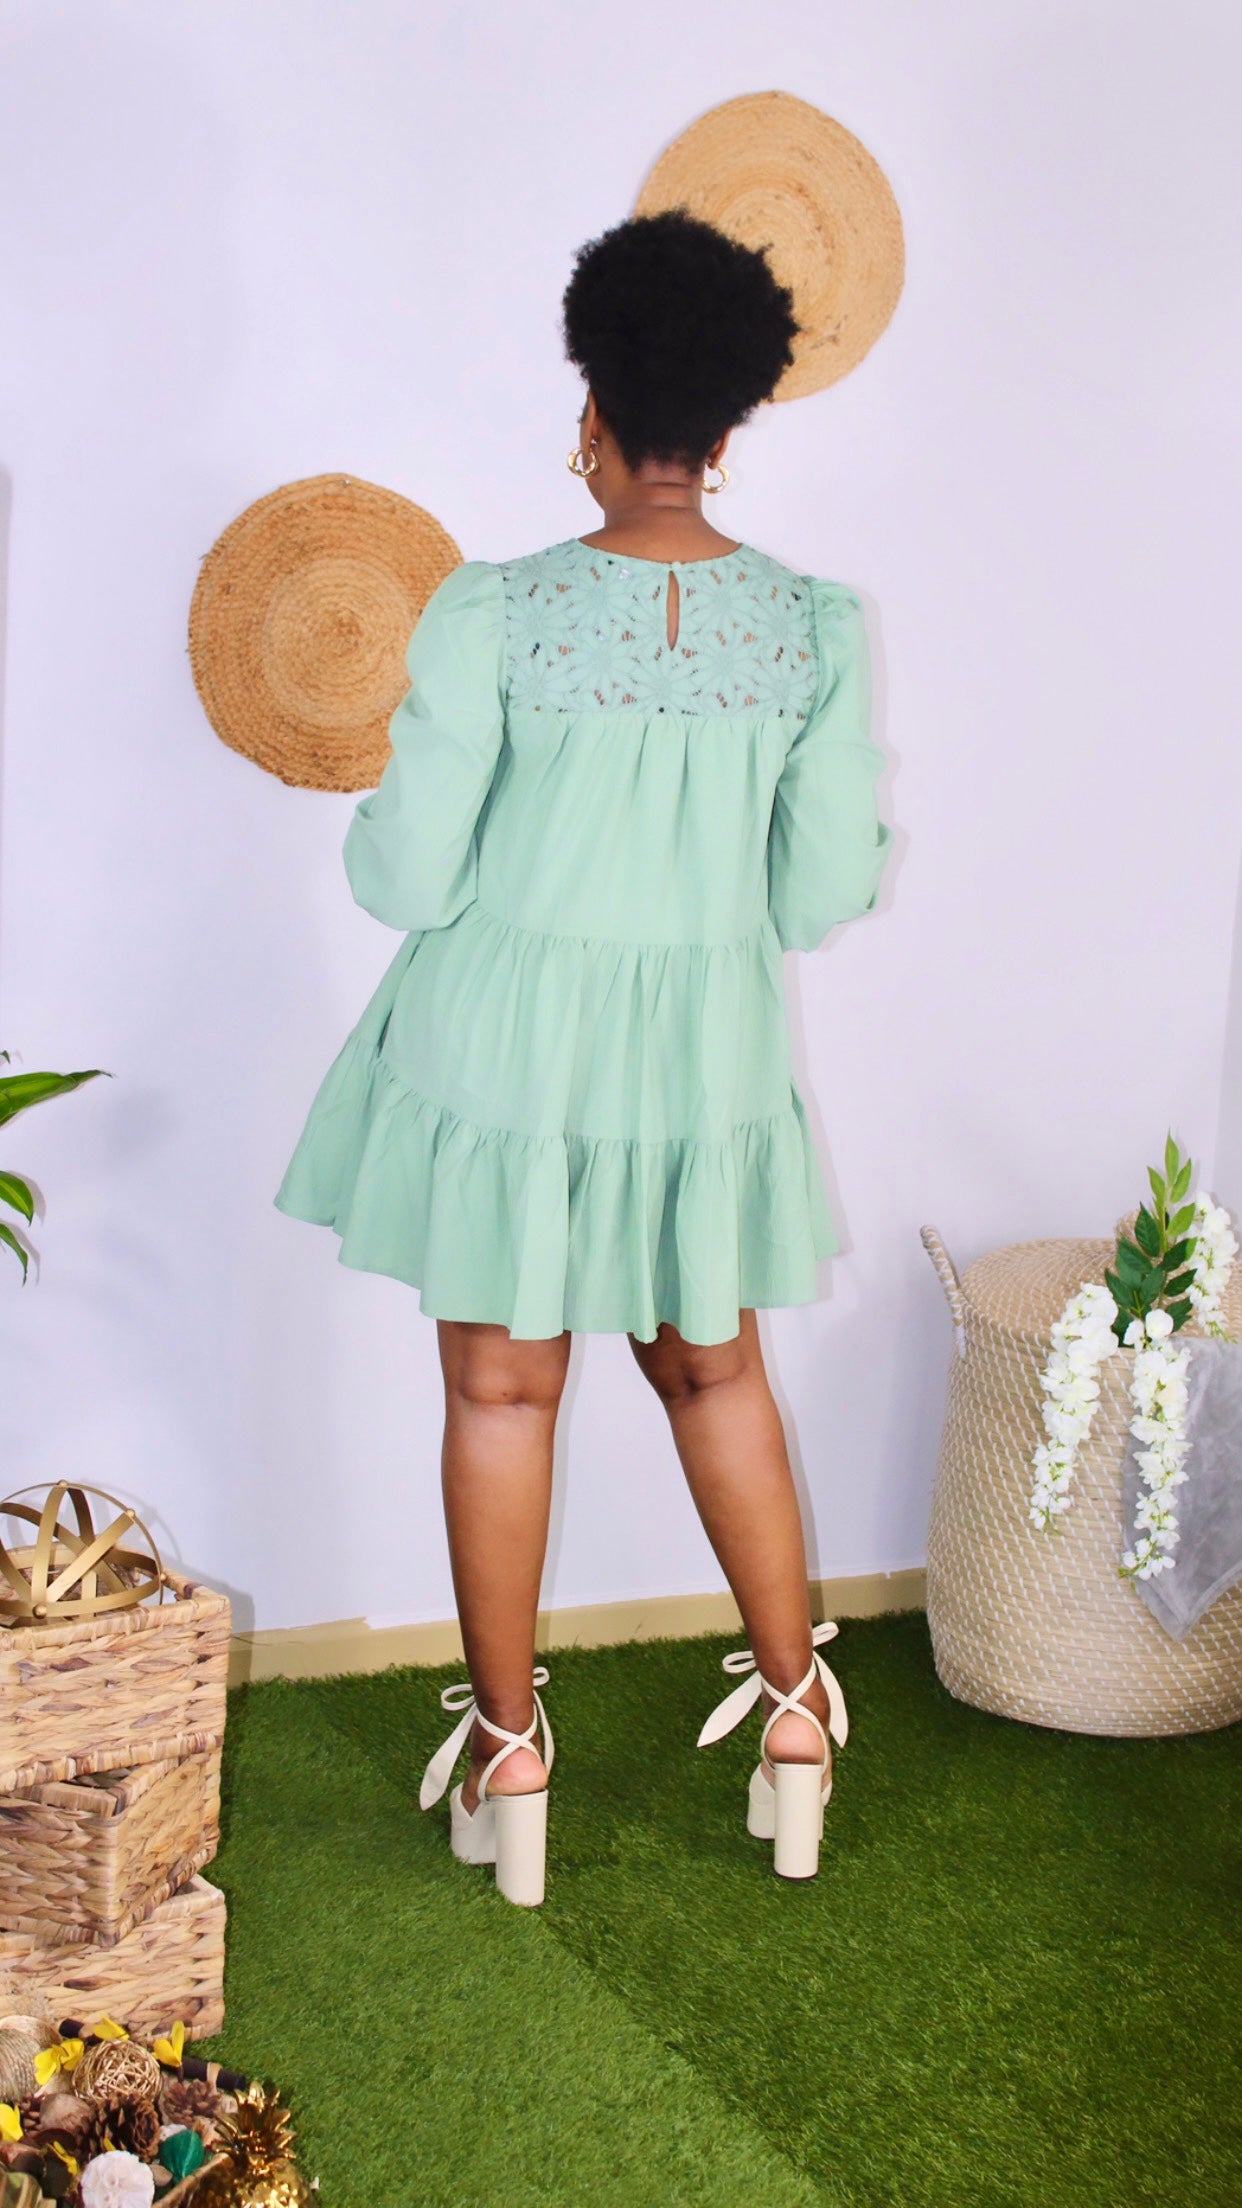 LACE TOP A-LINE SMOCK DRESS IN SAGE ABOVE THE KNEE